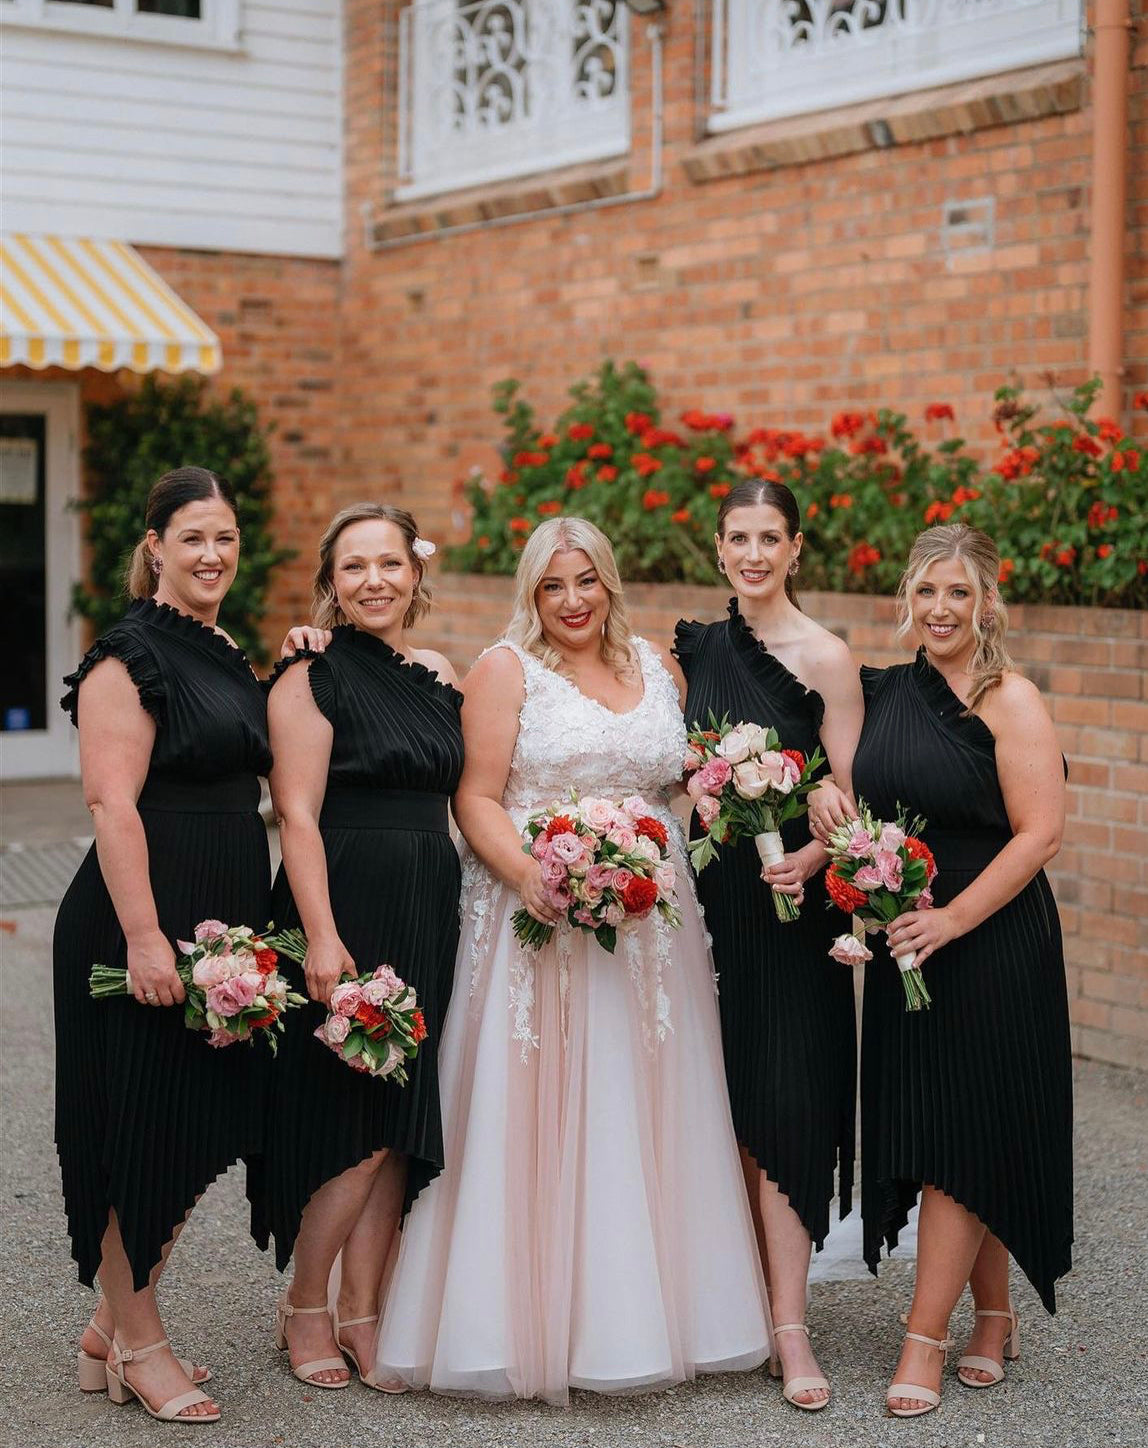 Hampstead Flowers, Wedding Flowers Melbourne, Wedding and events styling, bridal party flowers, flower crowns, bridal bouquet 